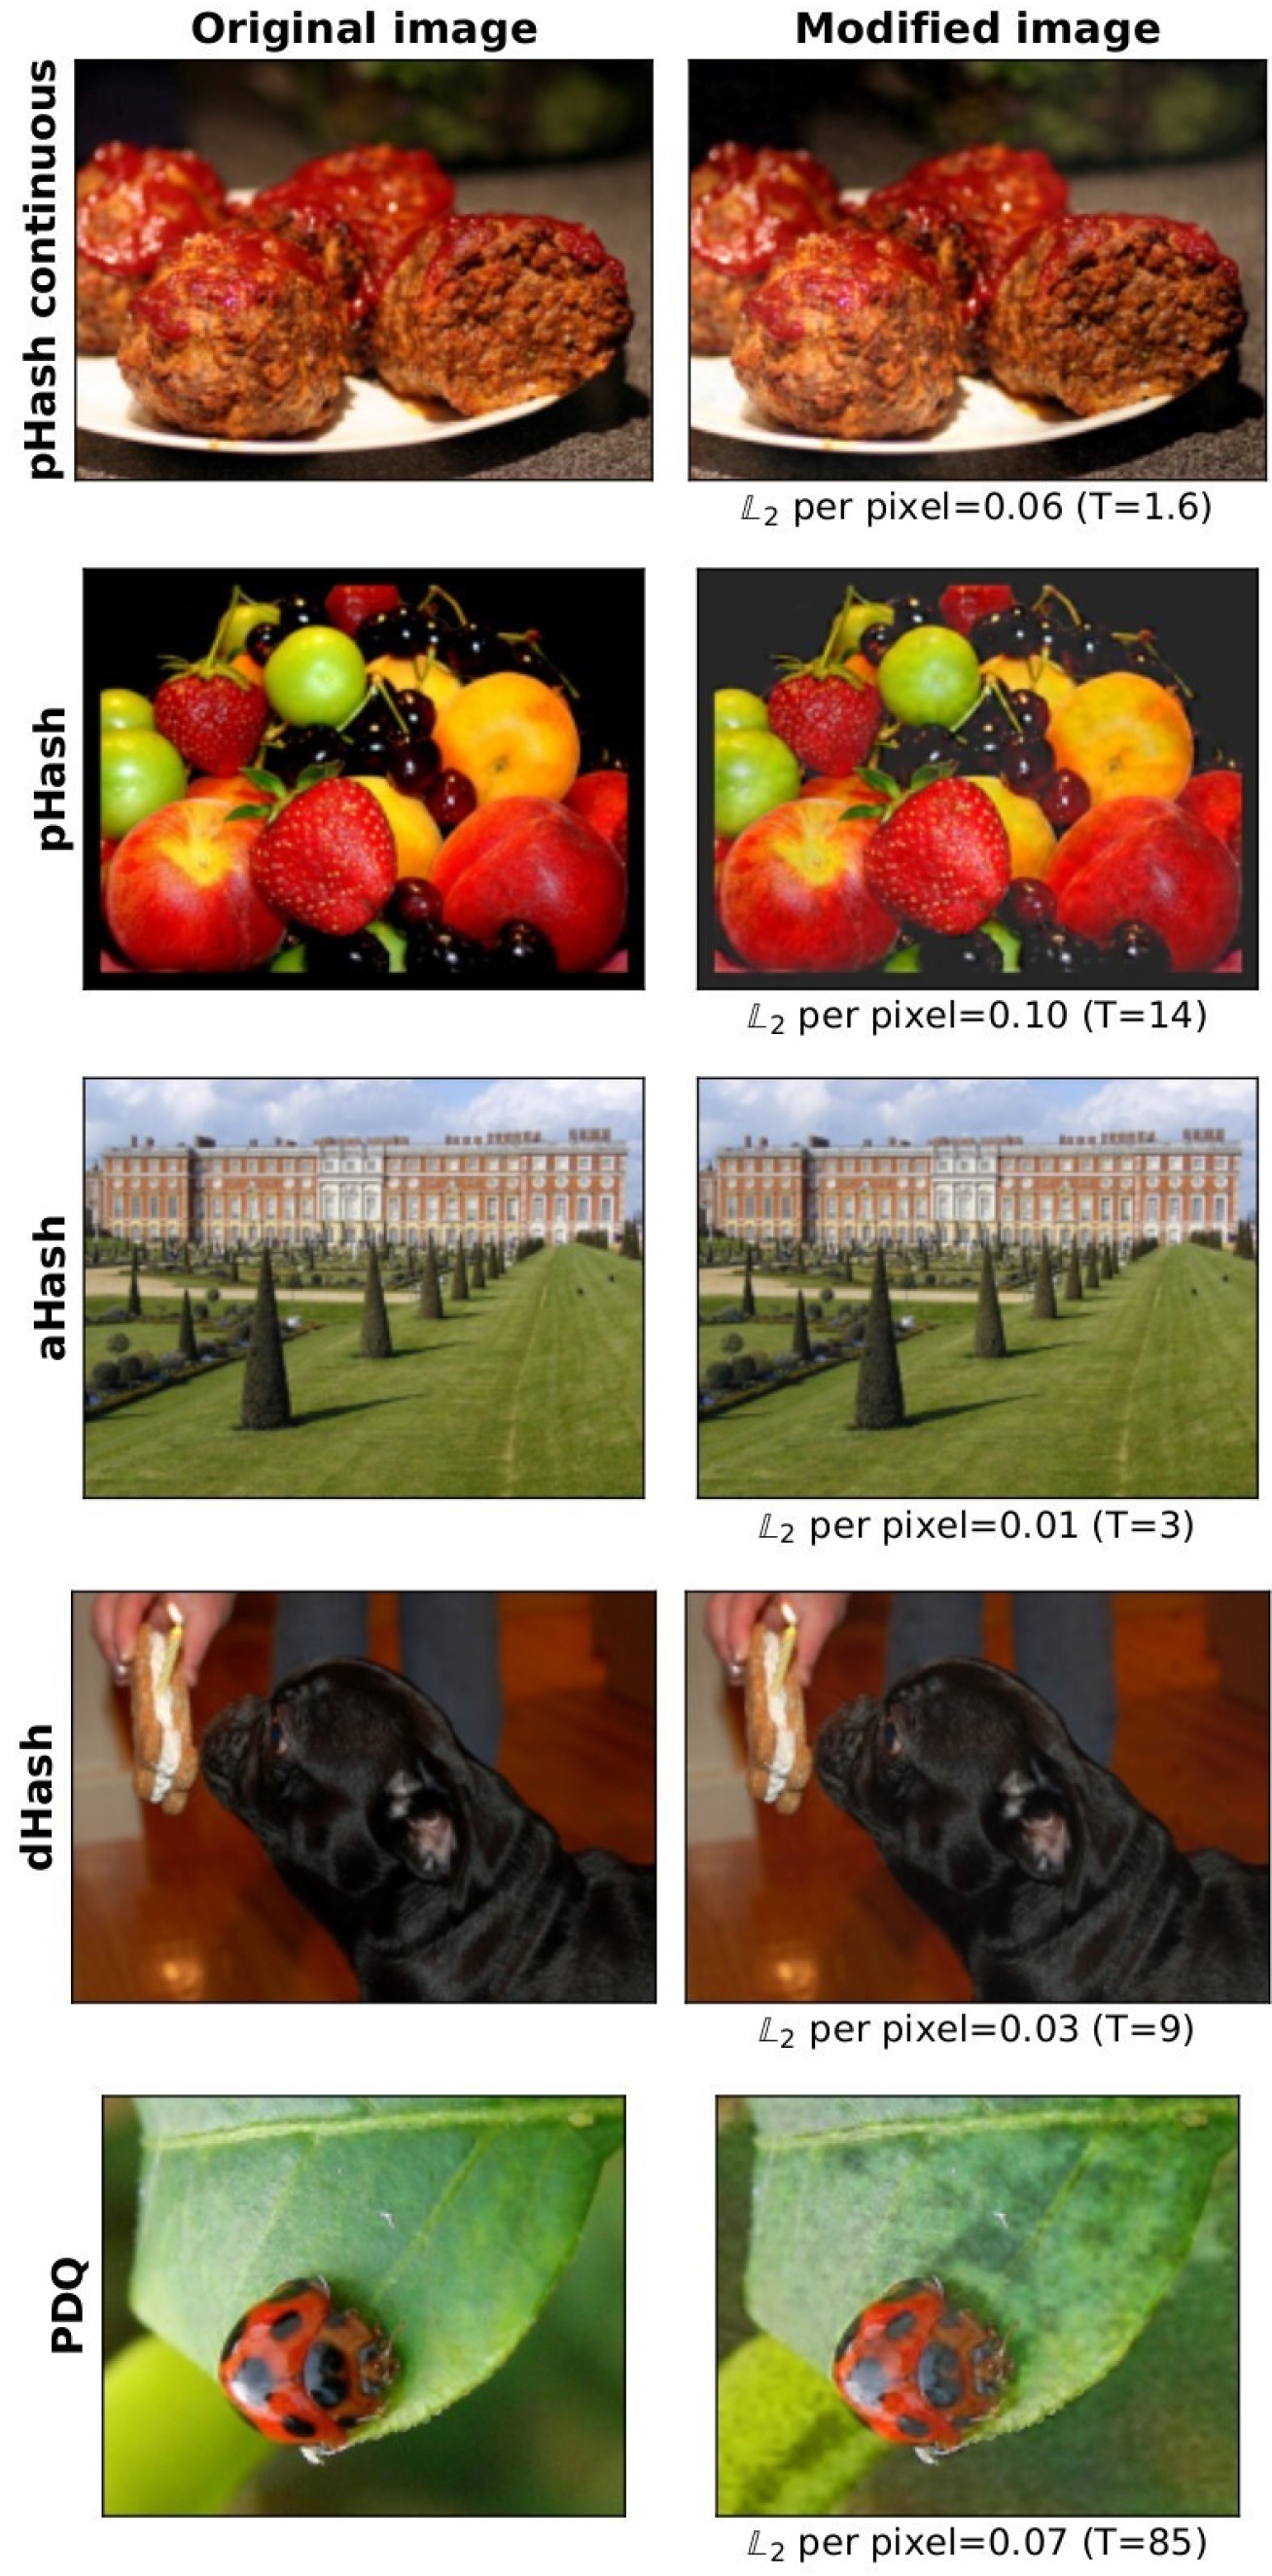 Side-by-side photographs of food, fruit, a building, a dog, and a ladybird. One side has been hashed, the other has not, but the differences are imperceptible to the human eye.